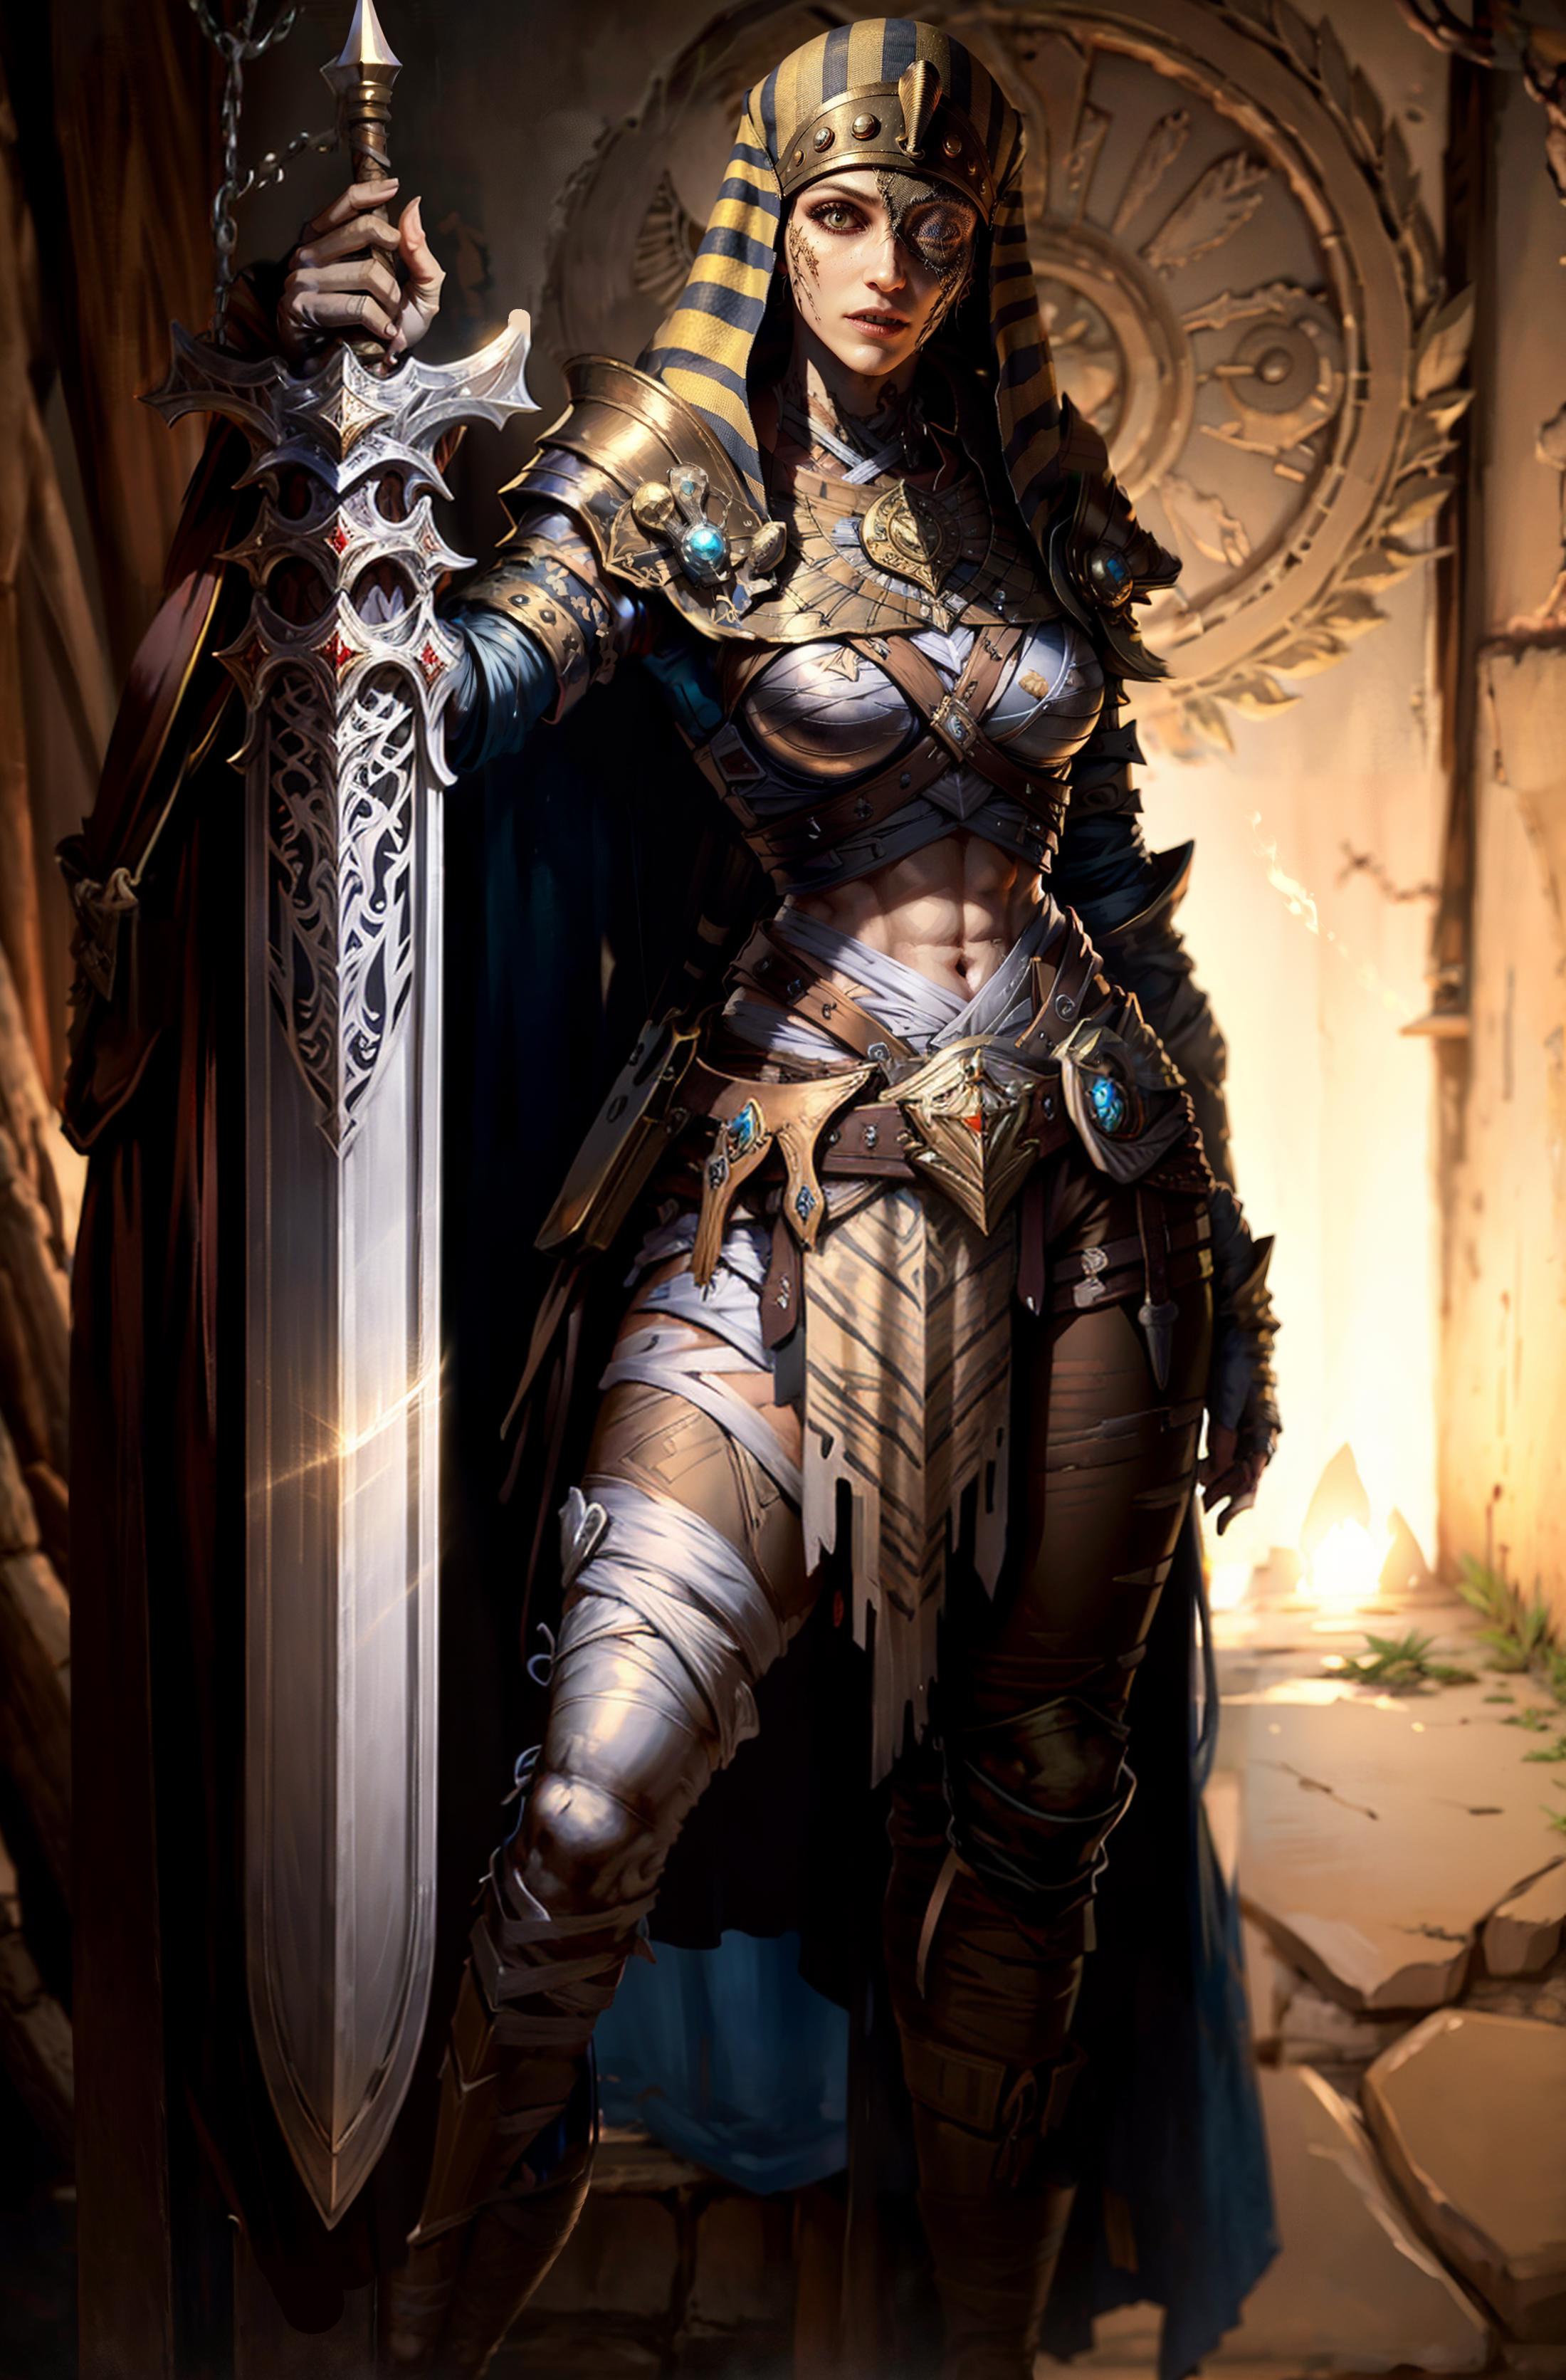 A Fantasy Artwork of a Warrior with a Sword and Shield, Wearing Chainmail and a Cape